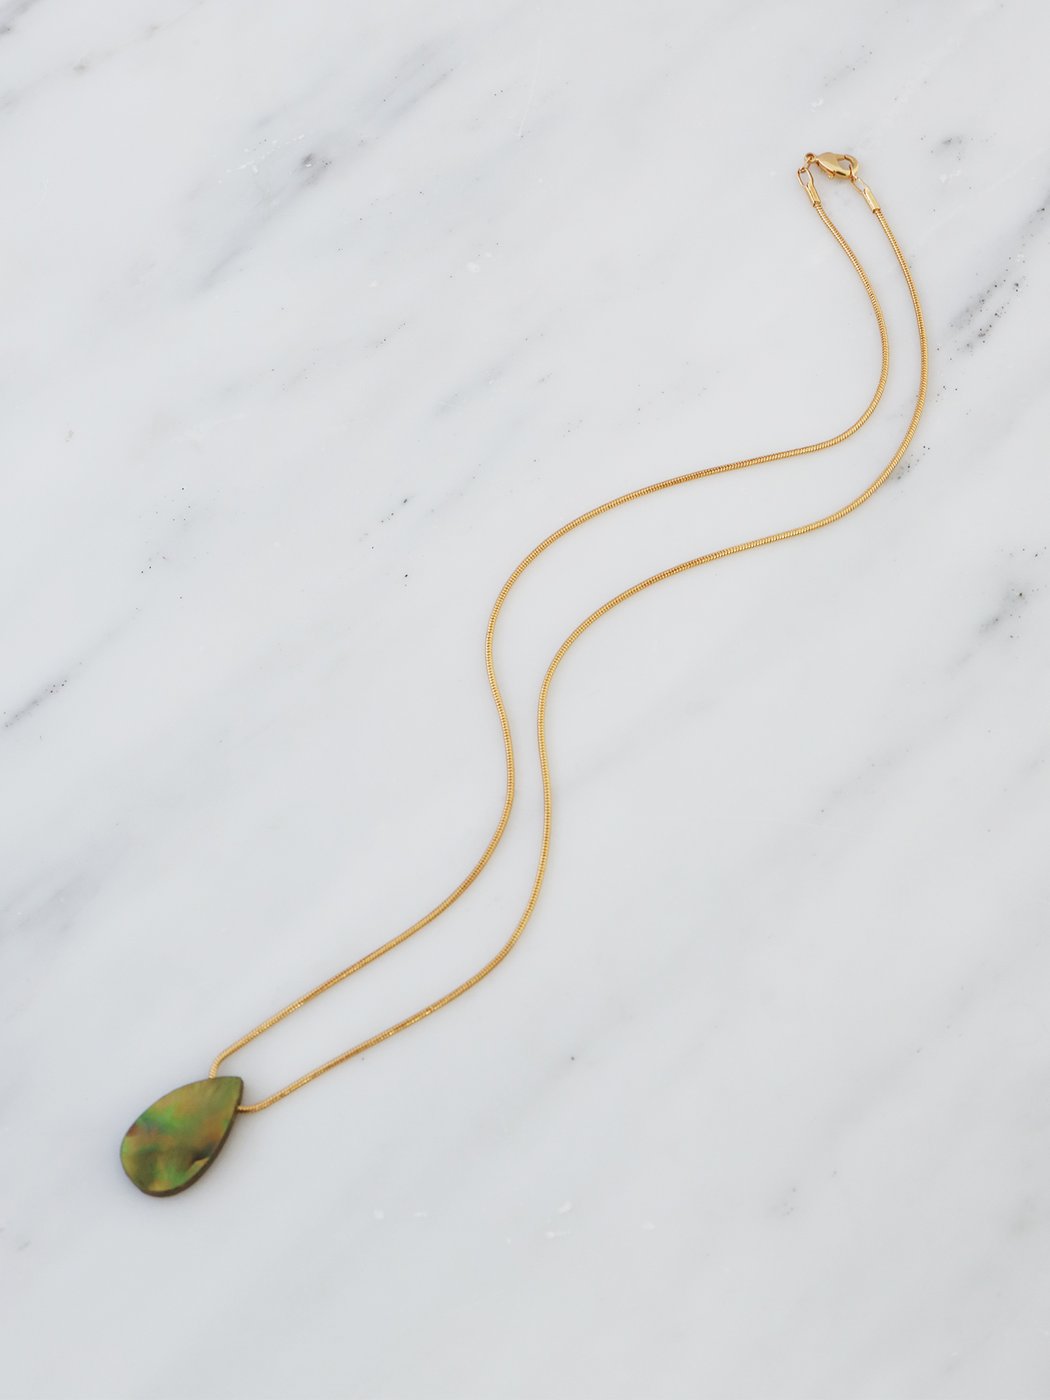 Raindrop necklace in Olive Green Mother of Pearl by Wolf & Moon - Lifestory - Wolf & Moon